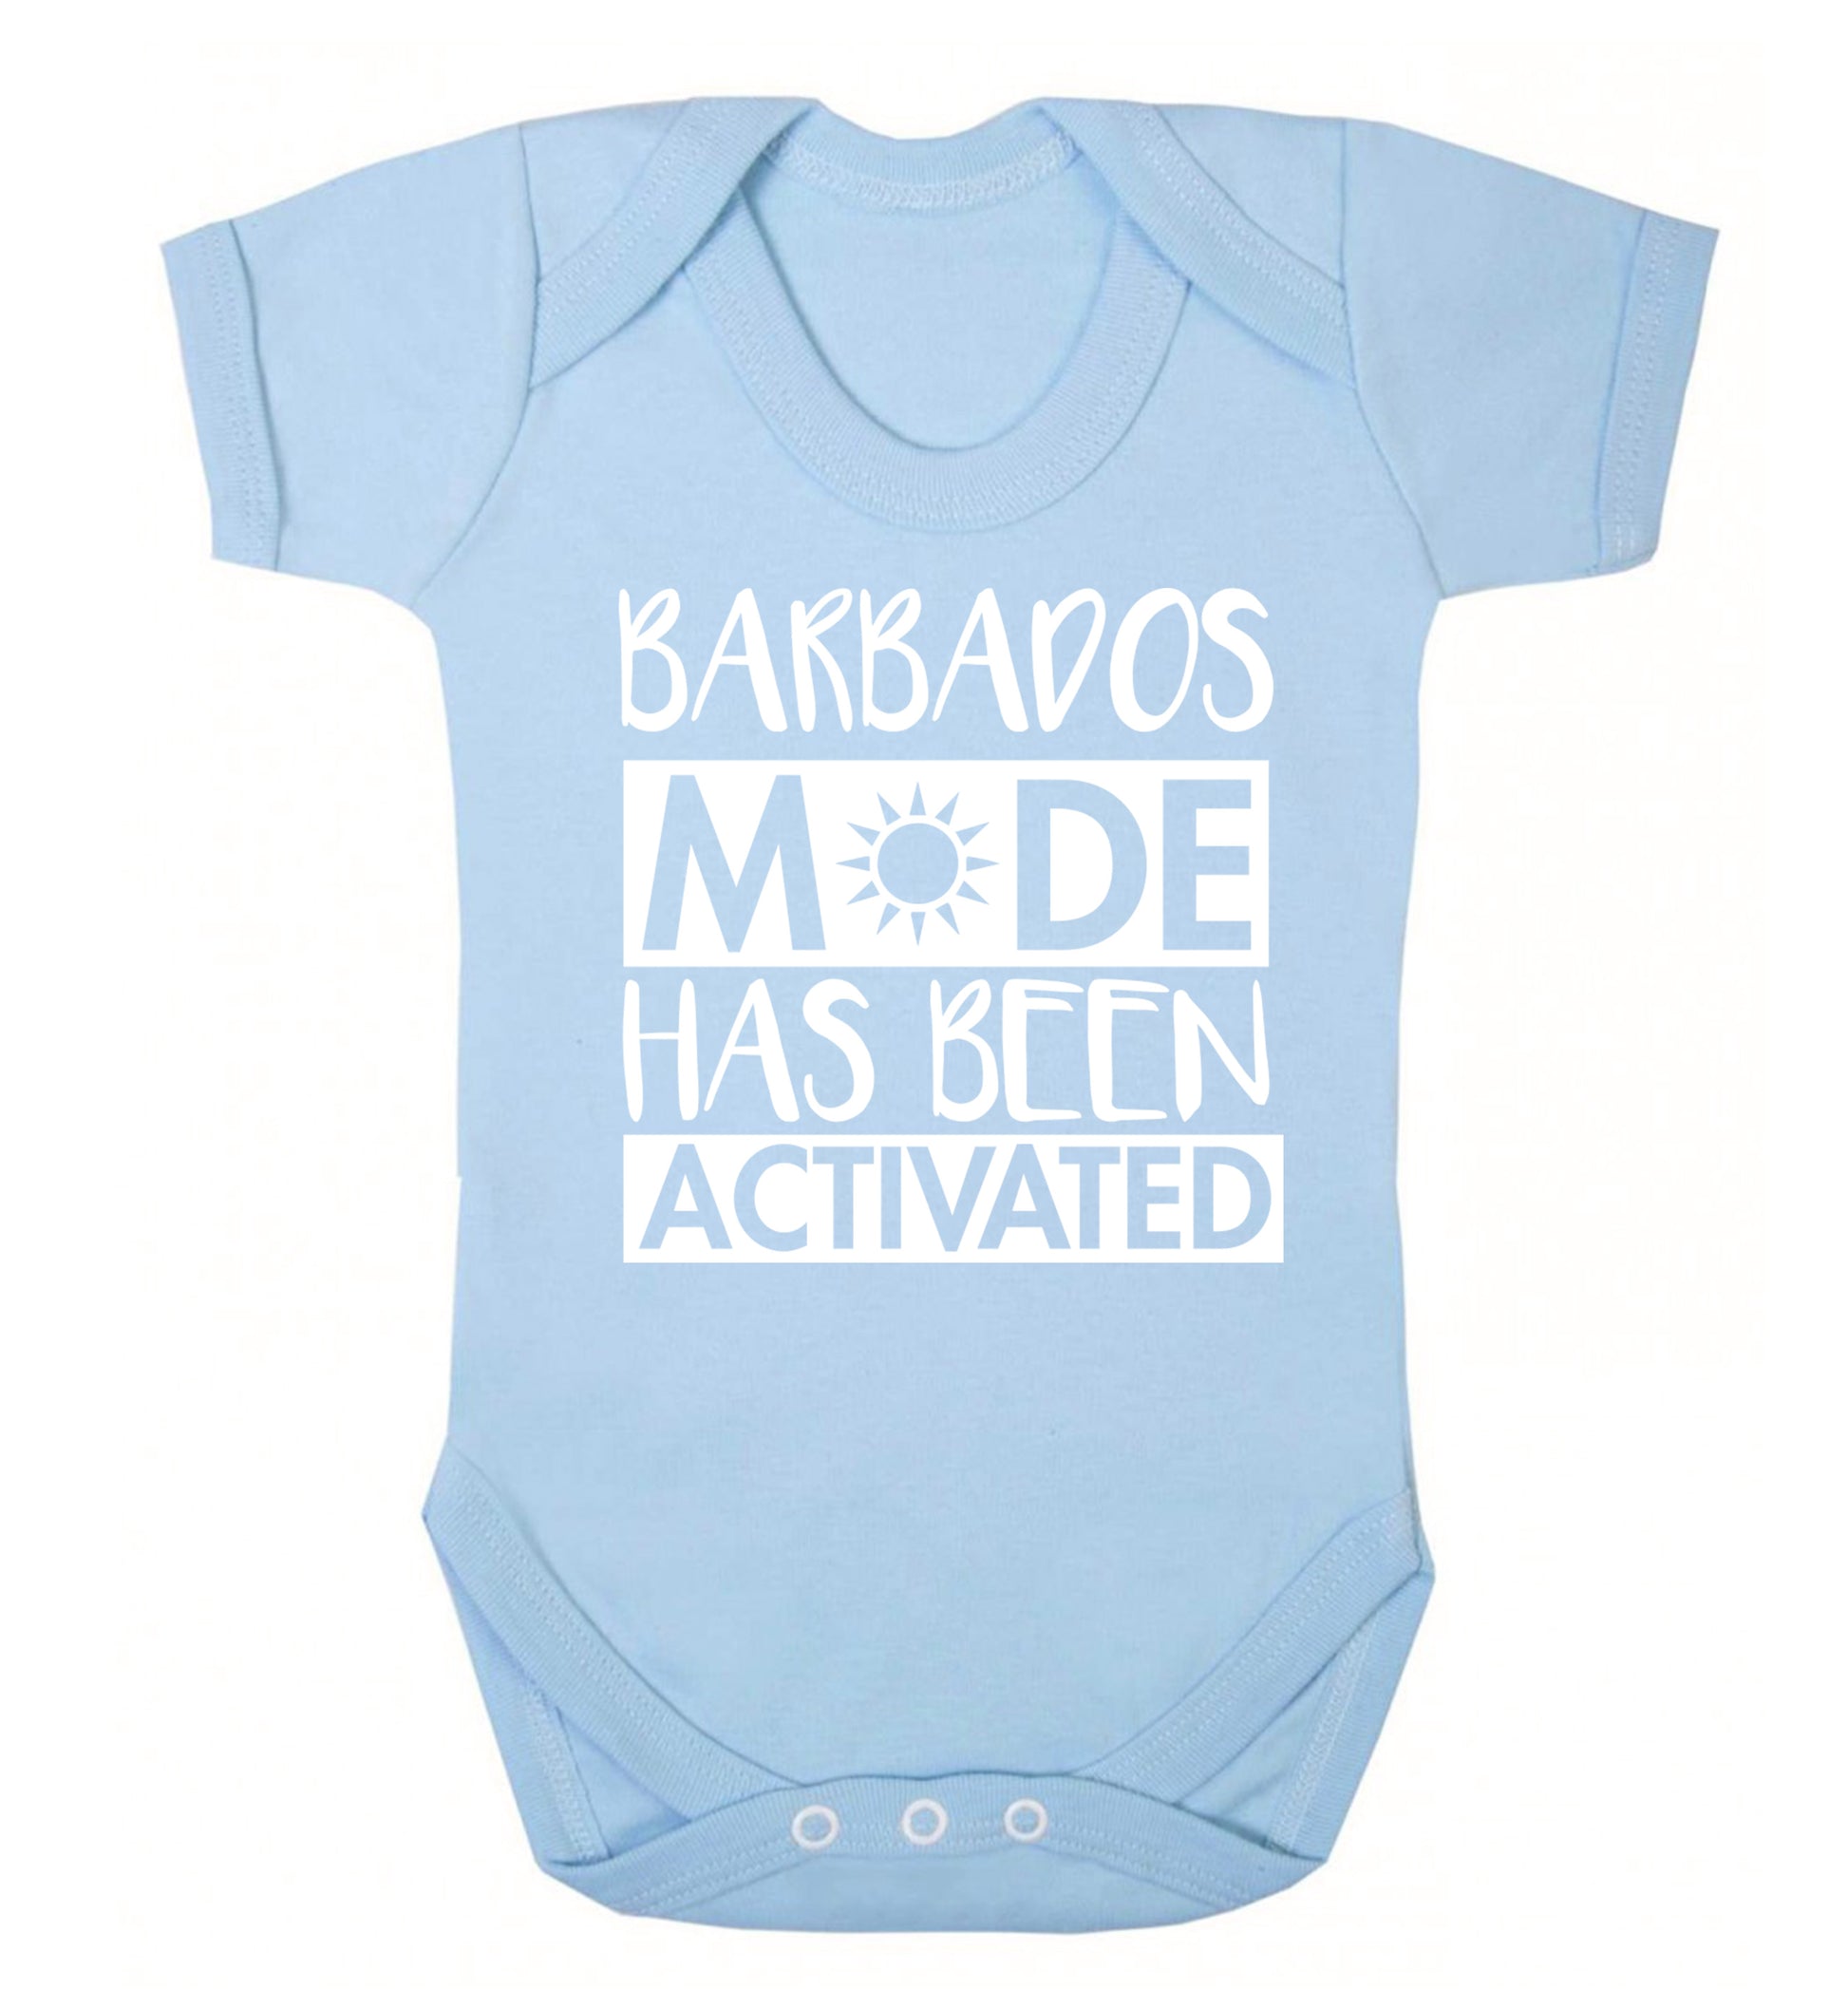 Barbados mode has been activated Baby Vest pale blue 18-24 months